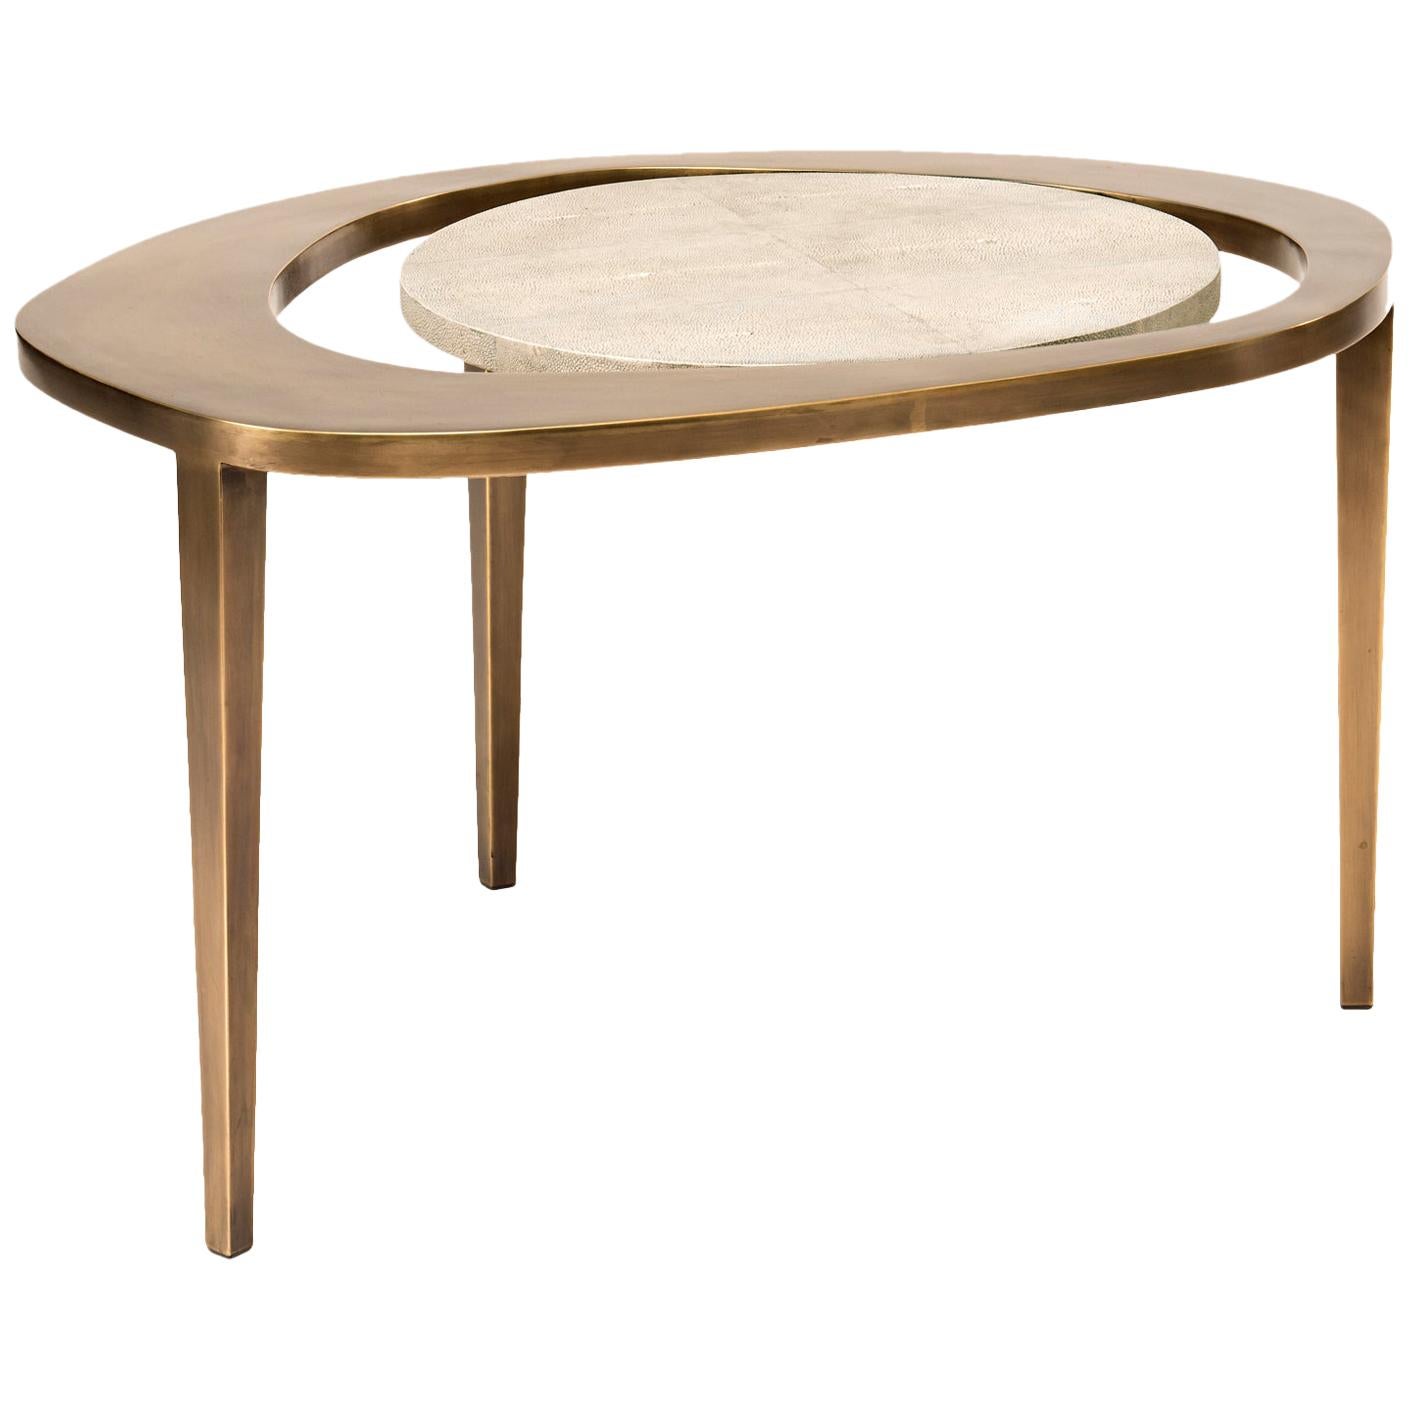 The set of 3 peacock nesting coffee tables, are an iconic R&Y Augousti piece and one of their first designs. The set includes the large, medium and small size. The pieces are both Minimalist and sculptural, with inspiration of course from the shape